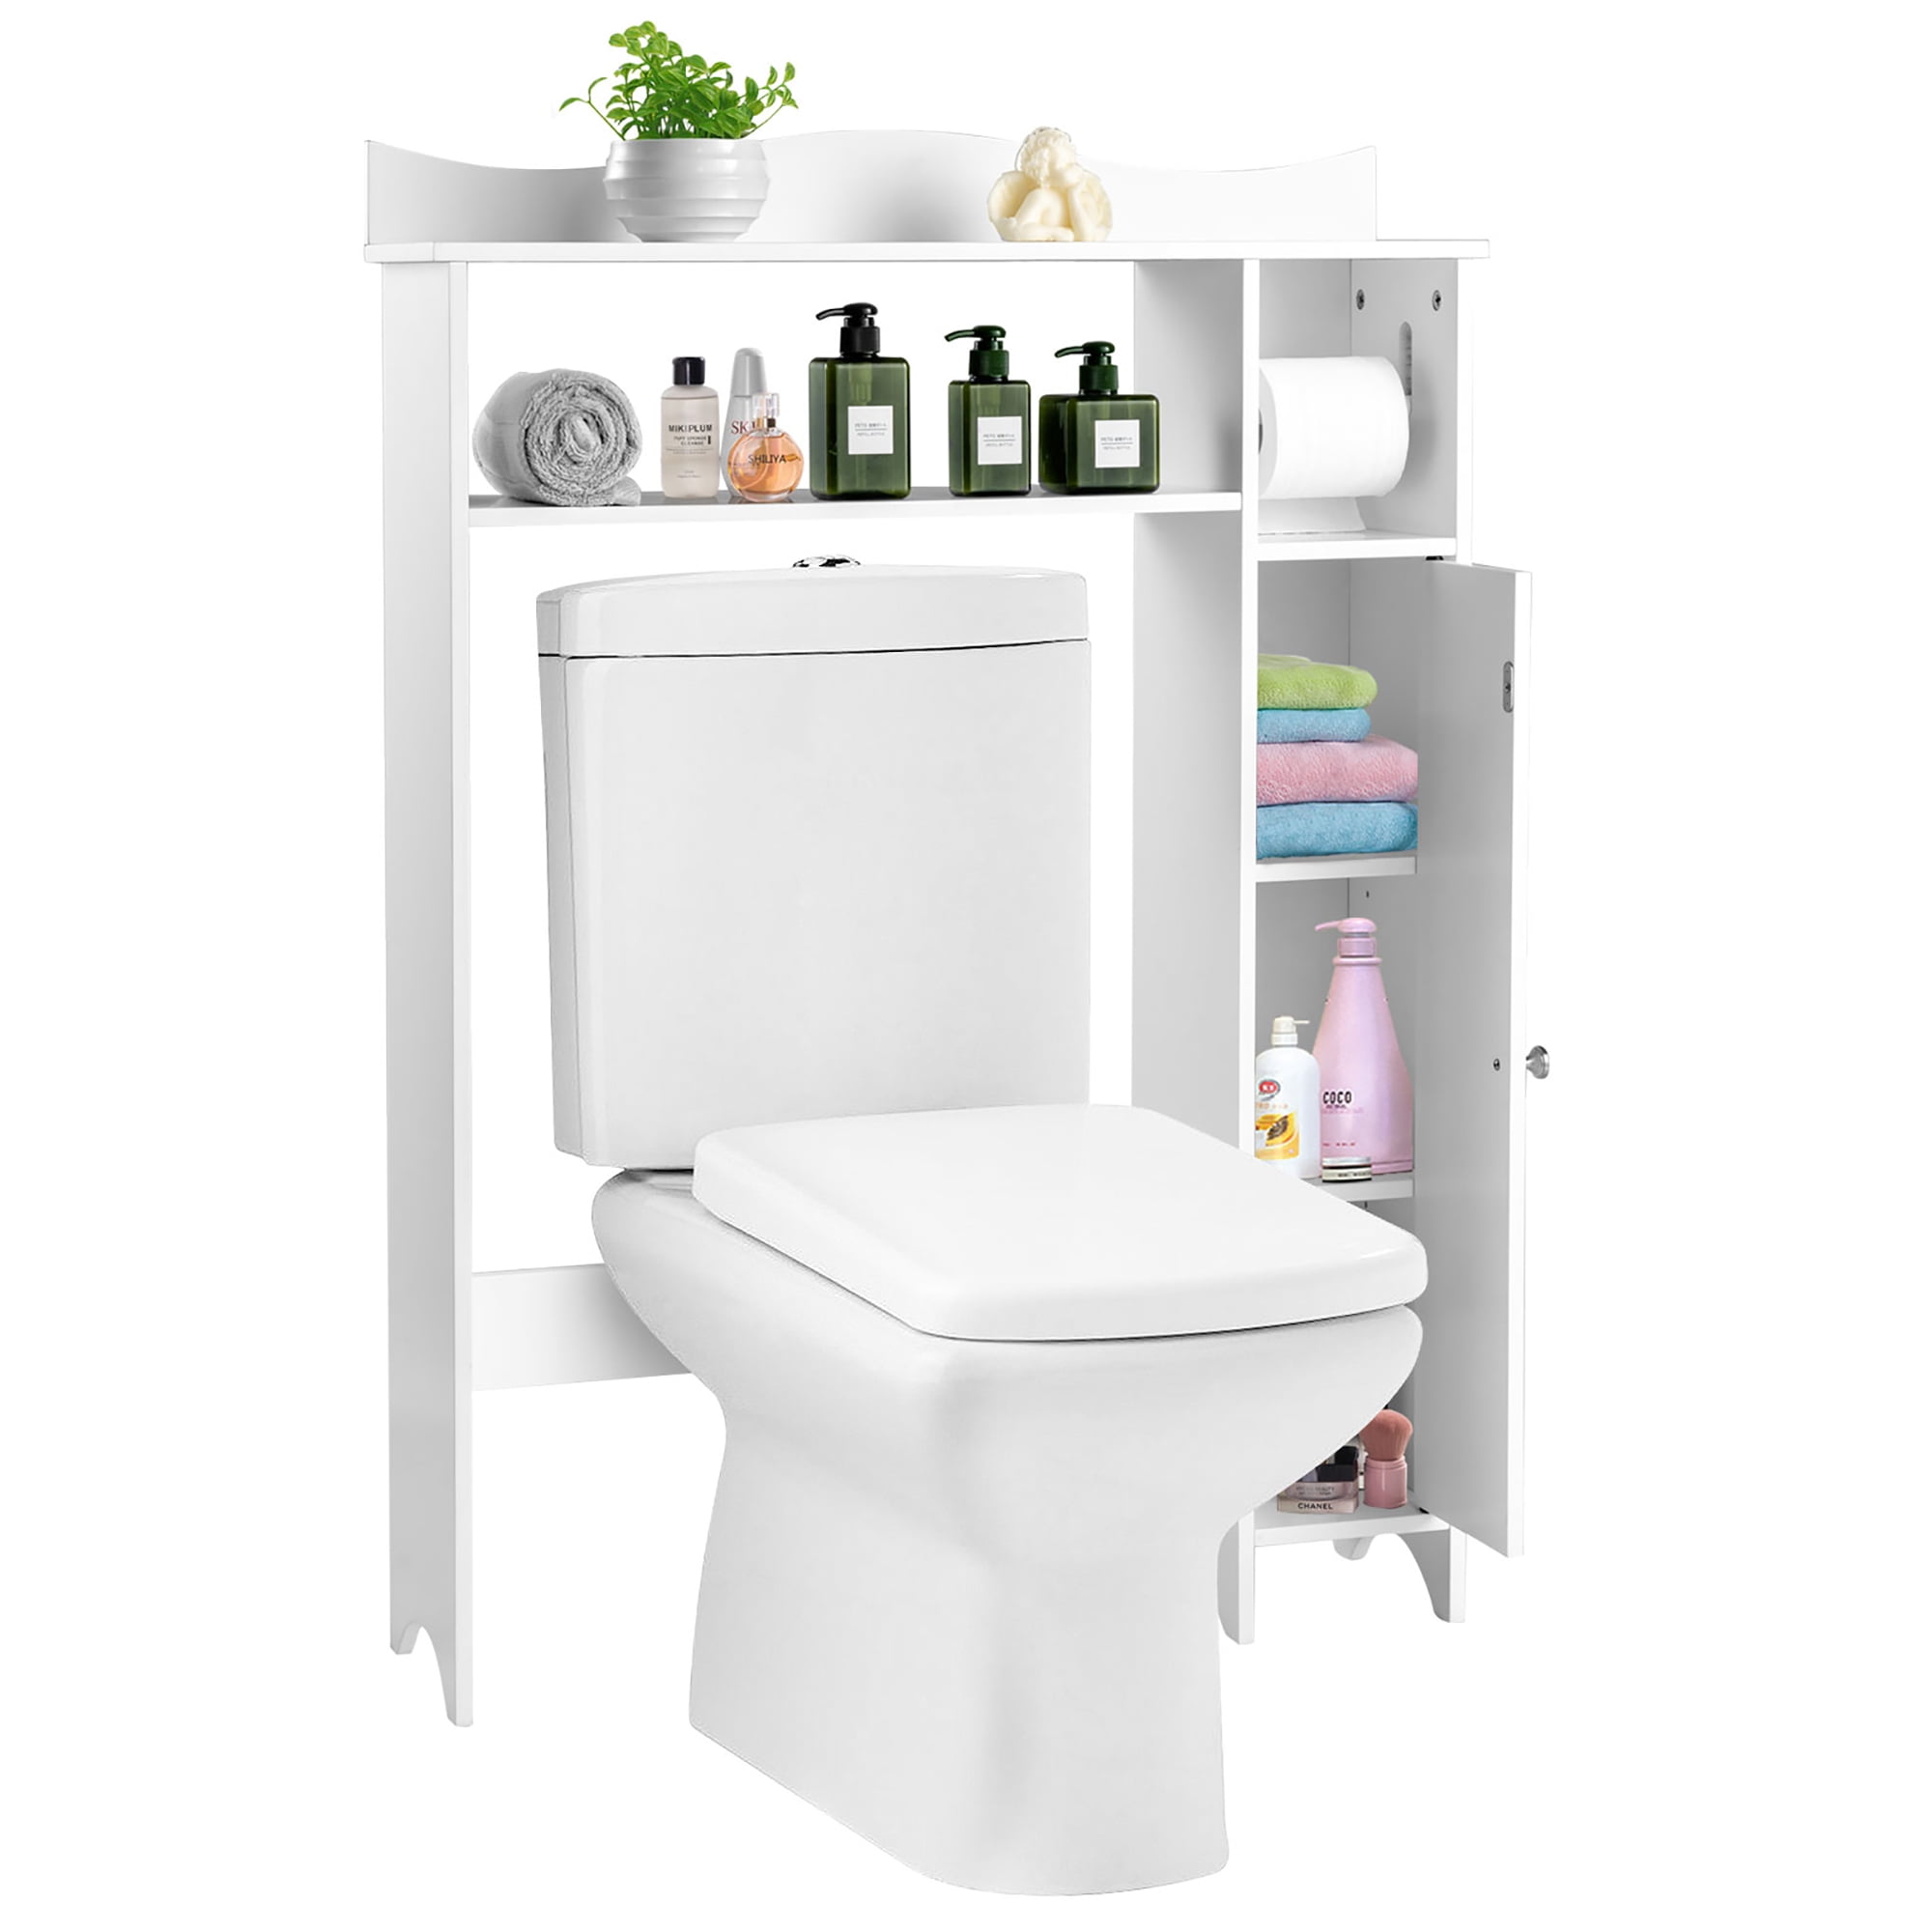 Details about   Space Saver Organization Over The Toilet Wood Storage Cabinet Home Bathroom 